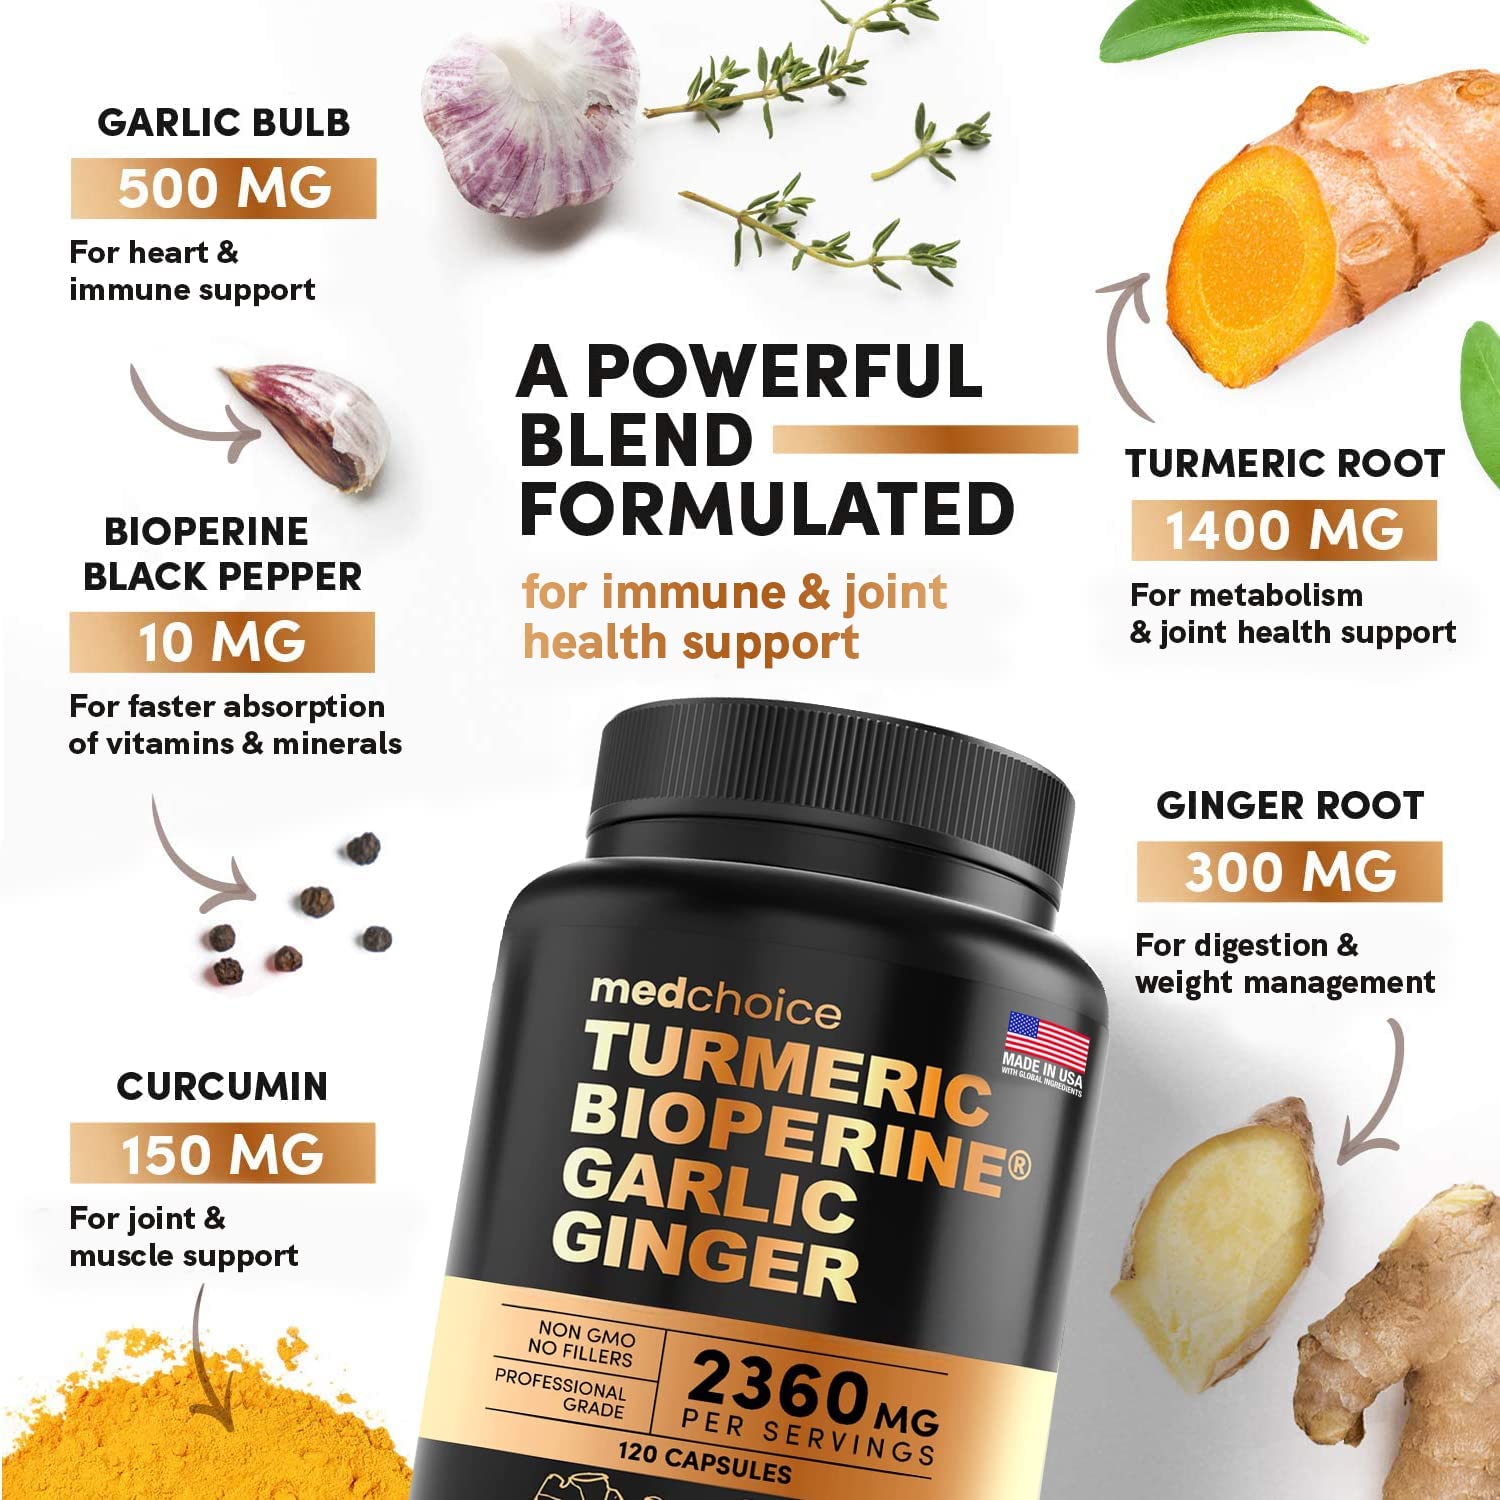 MEDCHOICE Turmeric & Ginger (120ct) and Nootropic Brain (60ct) Supplement Bundle - Wellness Duo for Joint, Digestion, Brain, & Mood Support - Vegan, Non-GMO, Gluten-Free